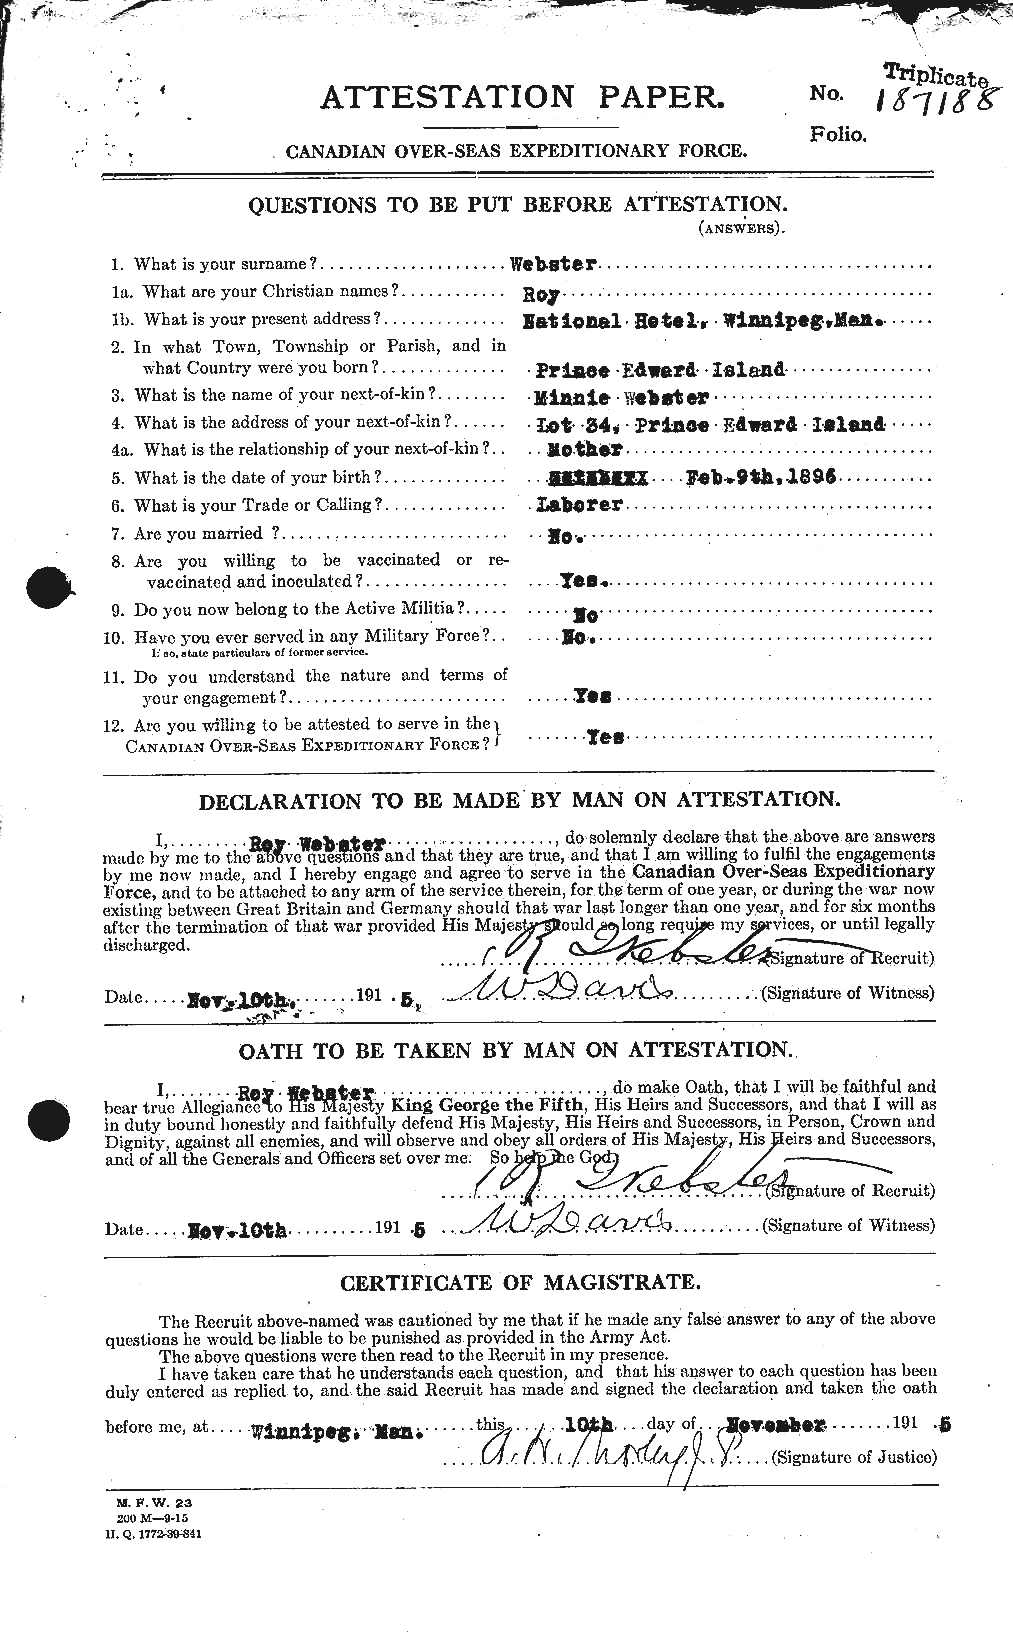 Personnel Records of the First World War - CEF 661972a